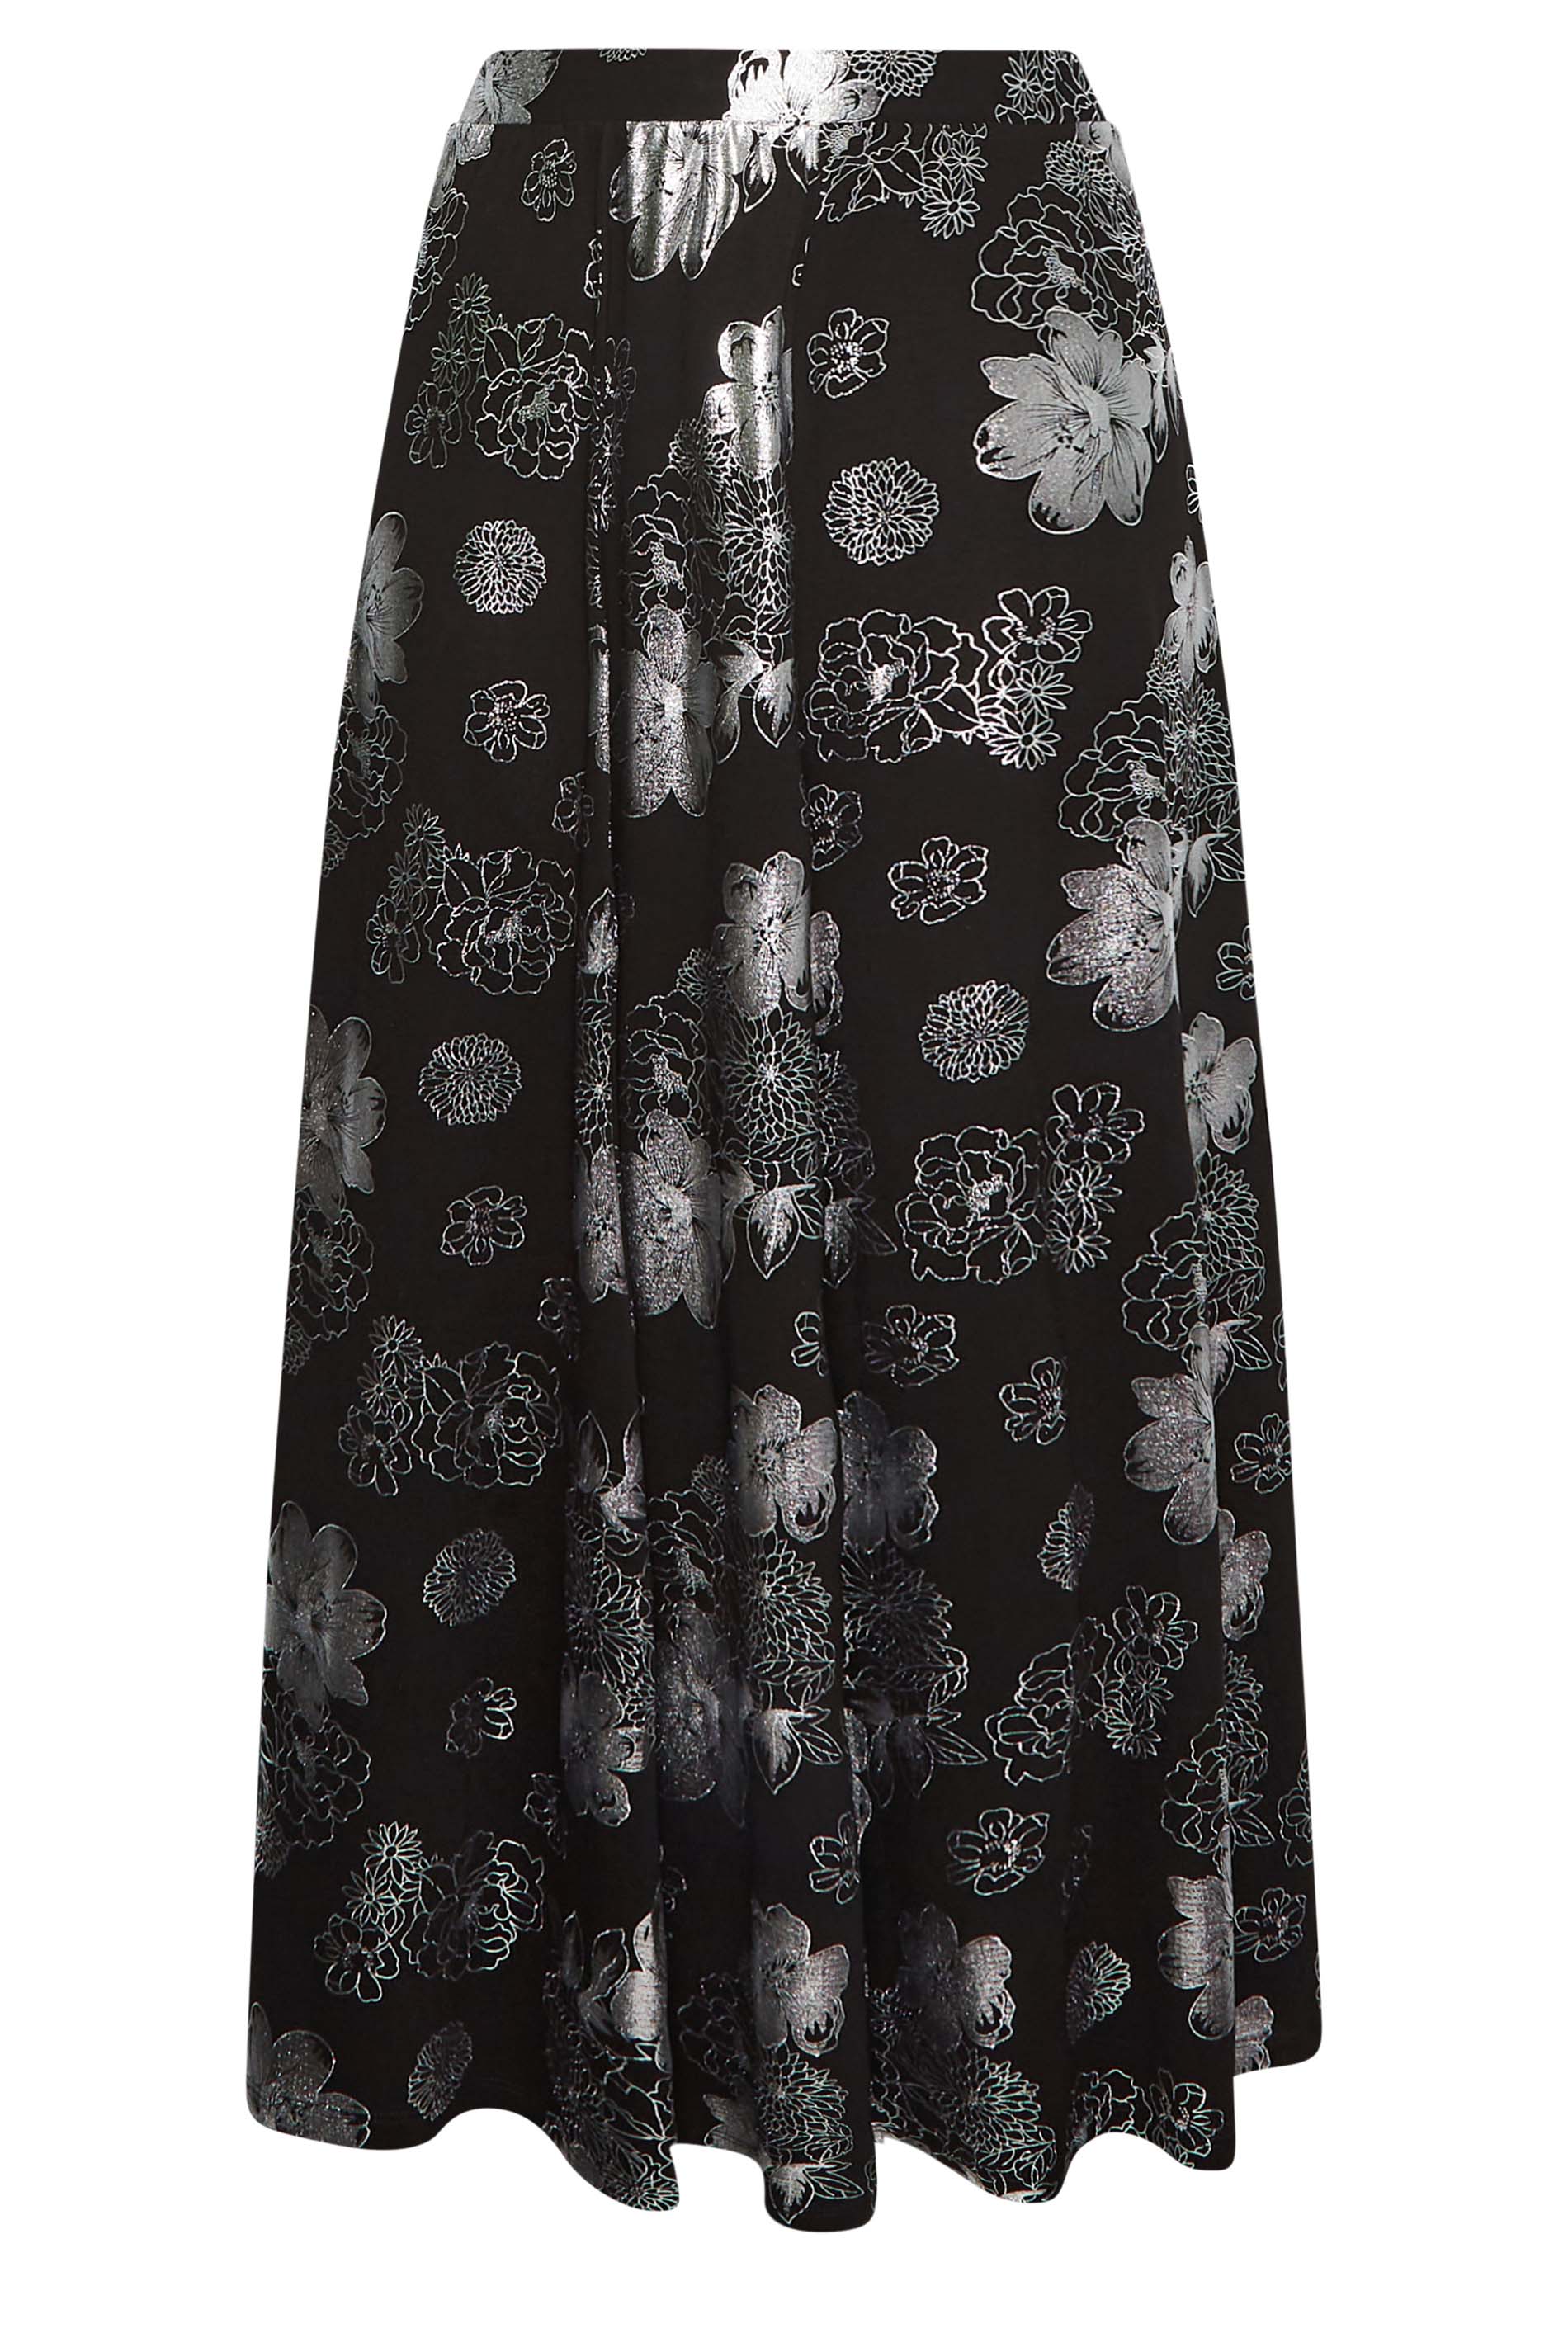 YOURS LUXURY Plus Size Black & Silver Floral Foil Printed Skirt | Yours Clothing 3